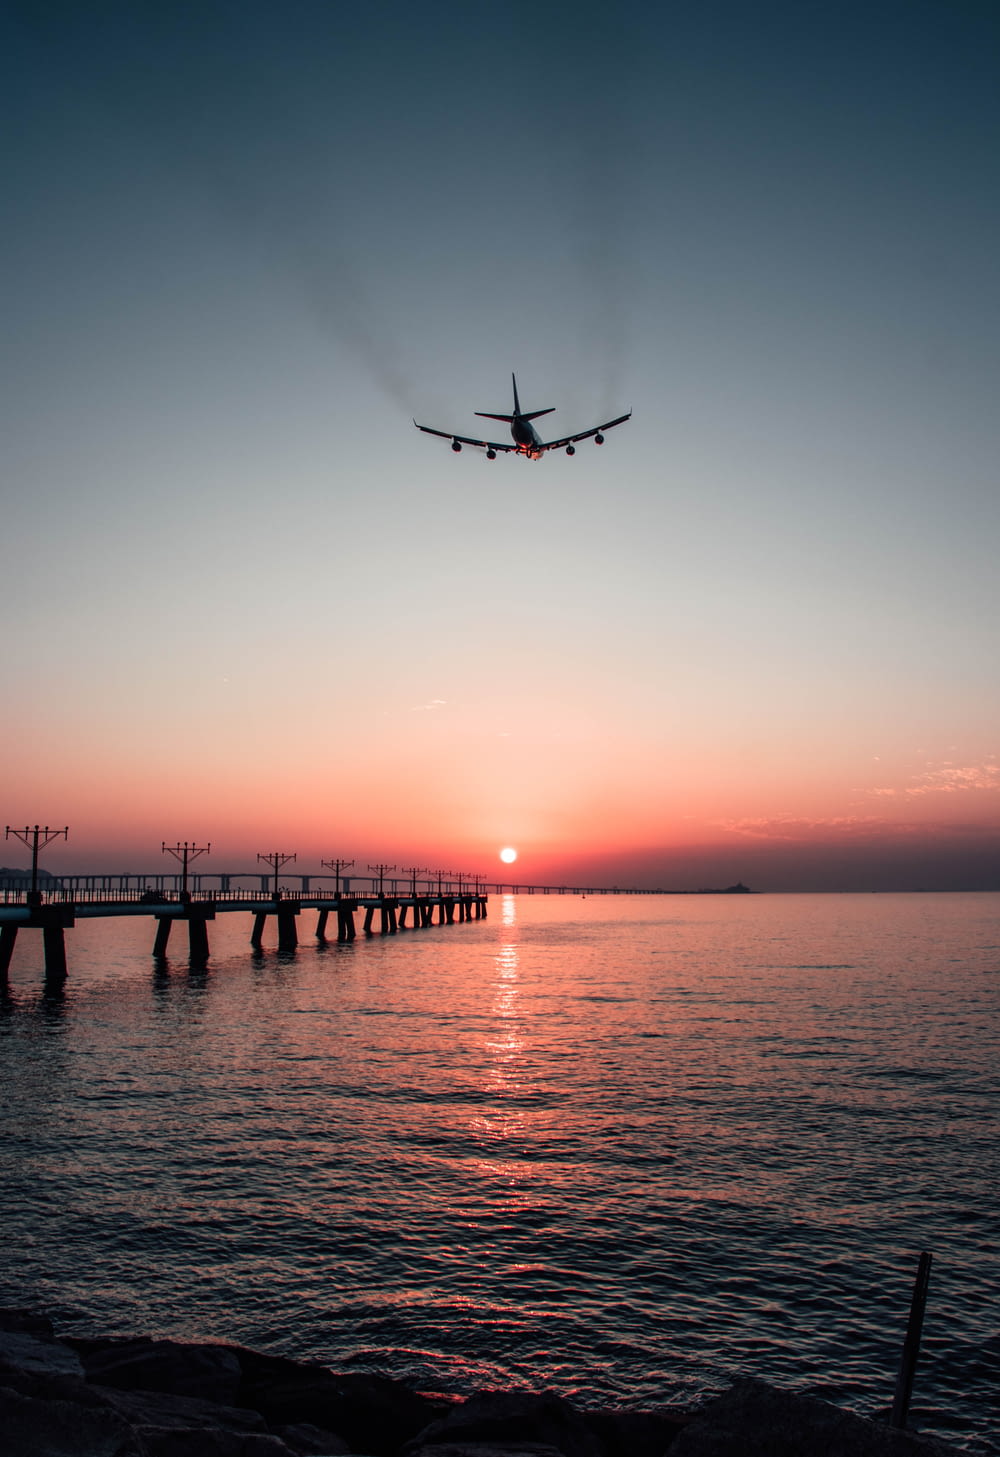 an airplane flying over a body of water at sunset